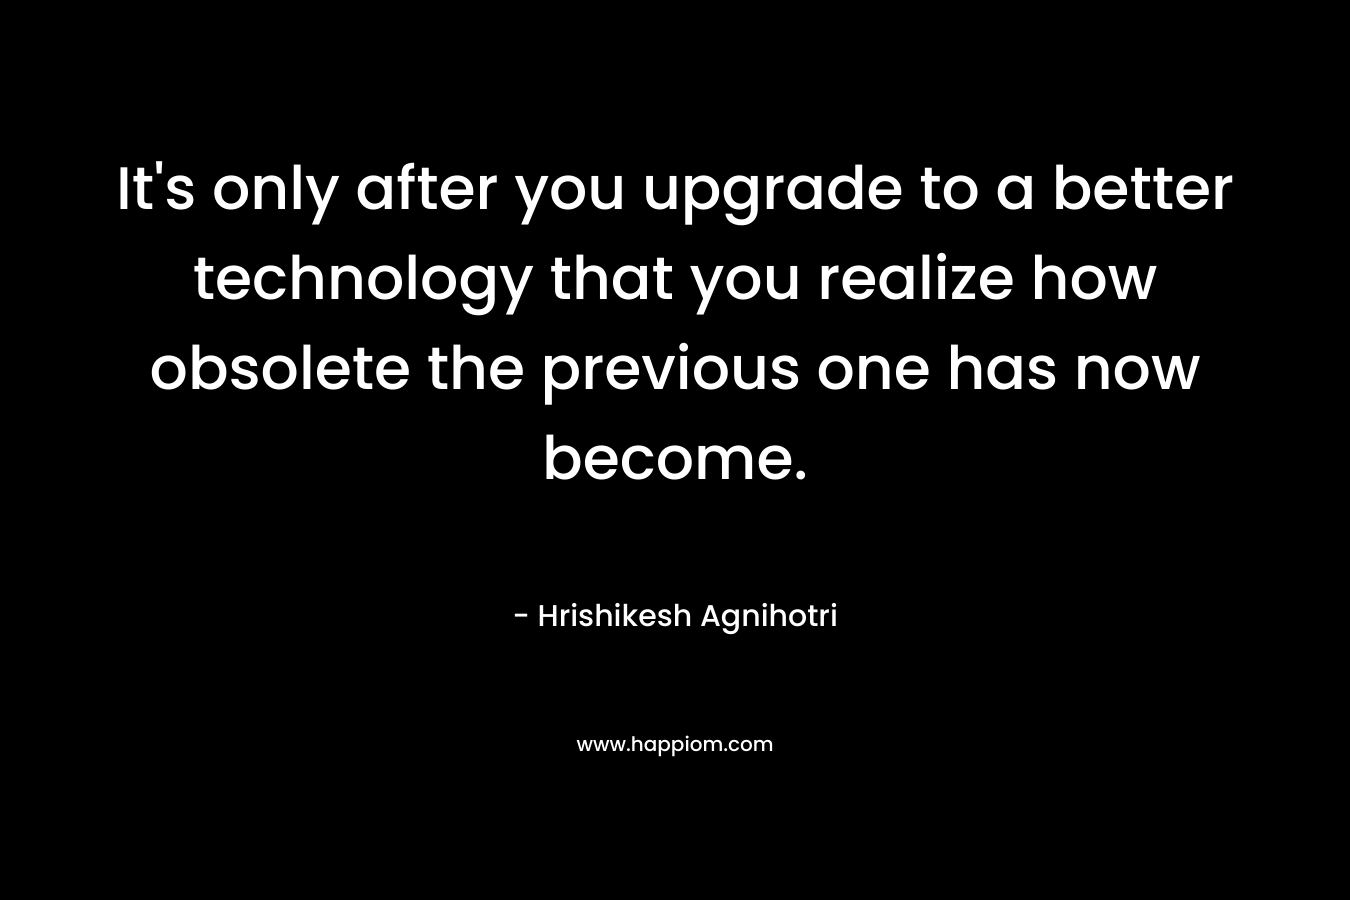 It’s only after you upgrade to a better technology that you realize how obsolete the previous one has now become. – Hrishikesh Agnihotri